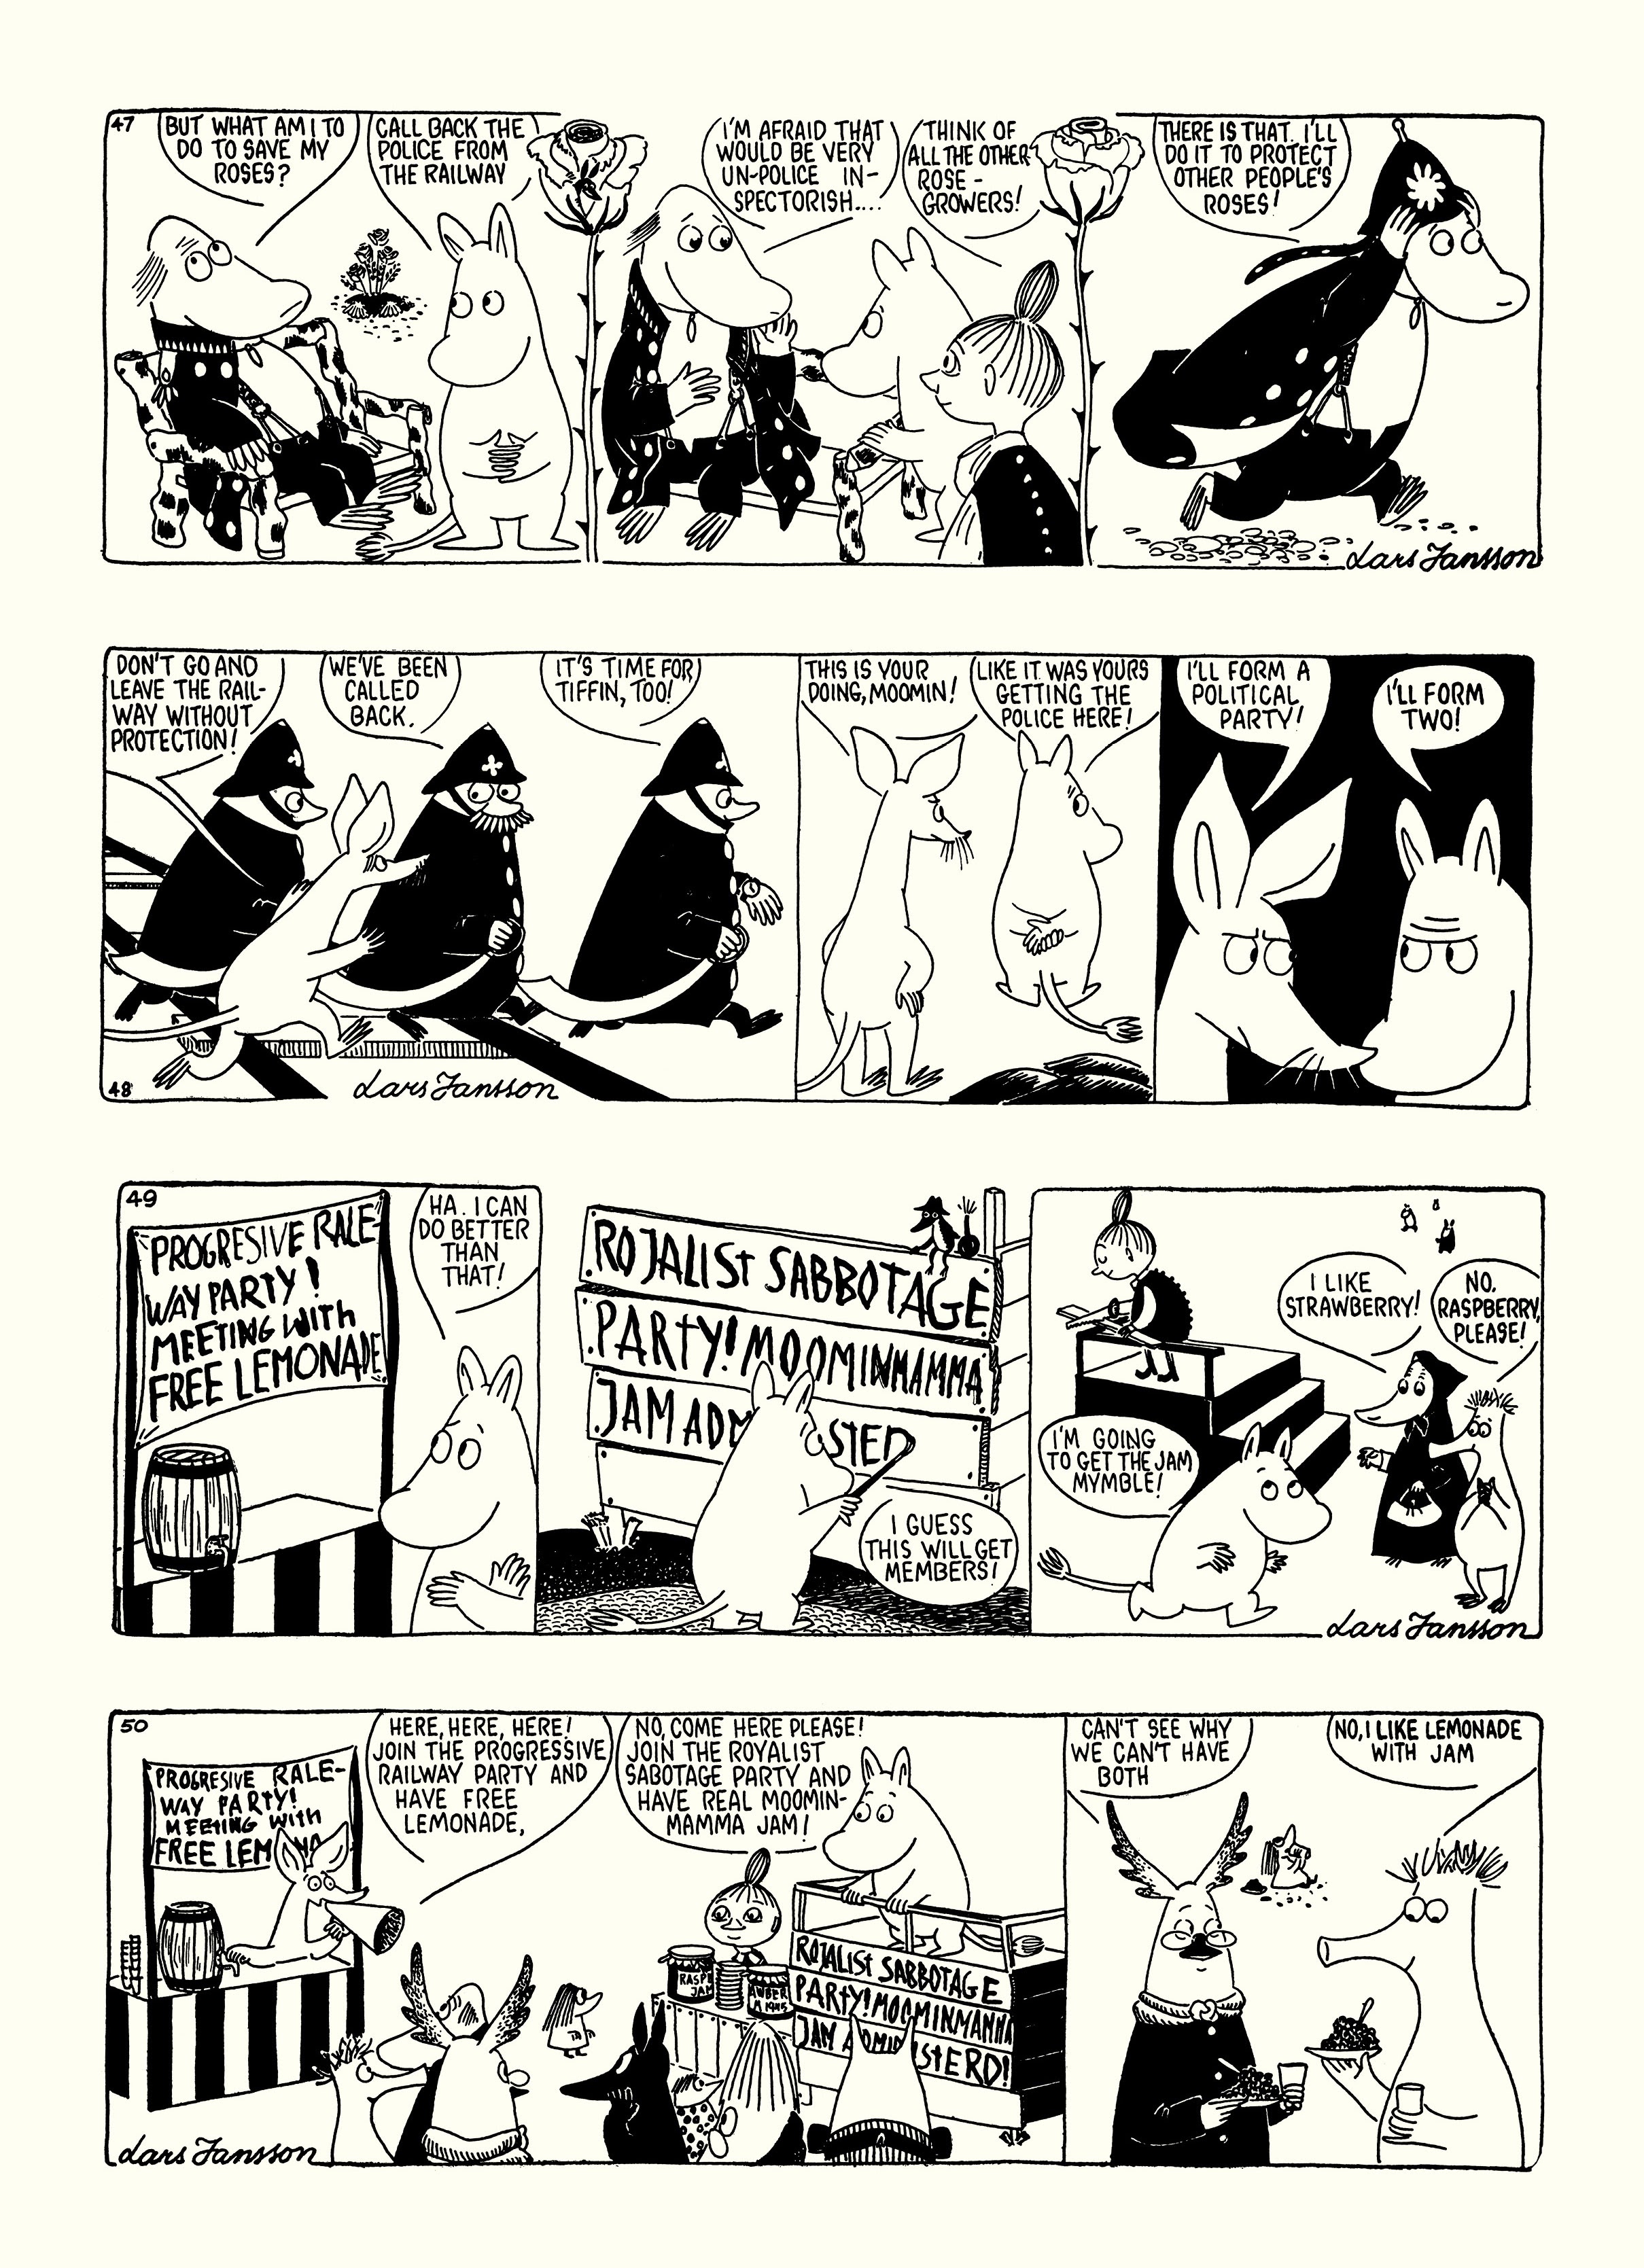 Read online Moomin: The Complete Lars Jansson Comic Strip comic -  Issue # TPB 6 - 38